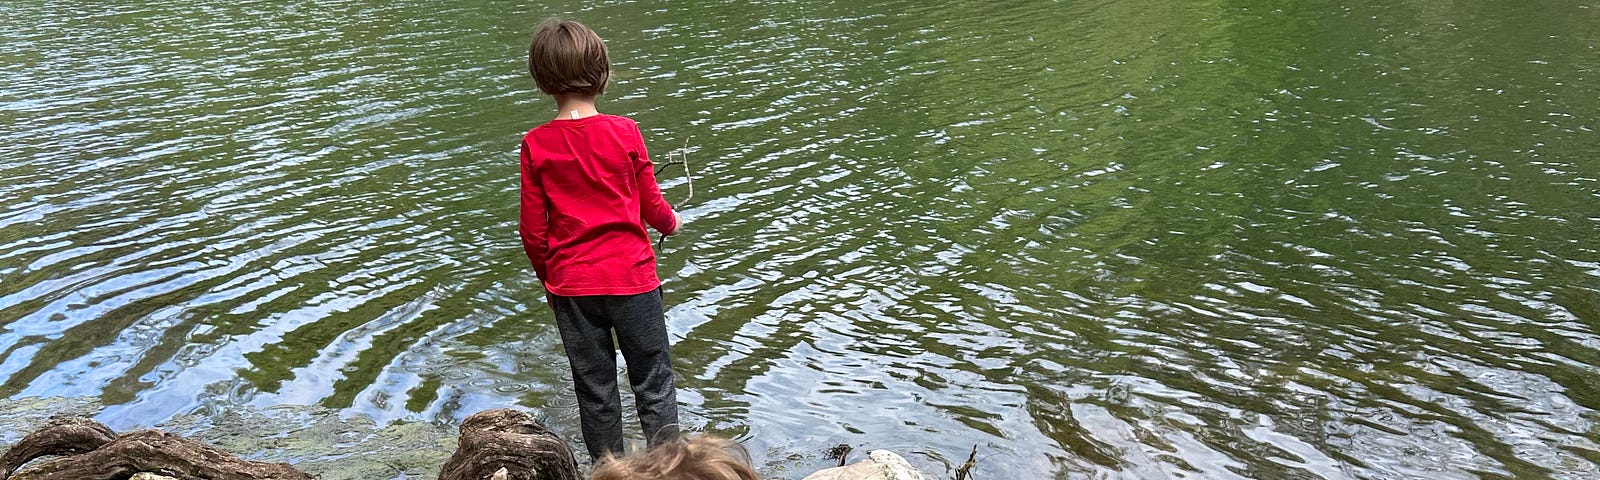 Image of two children at a river.